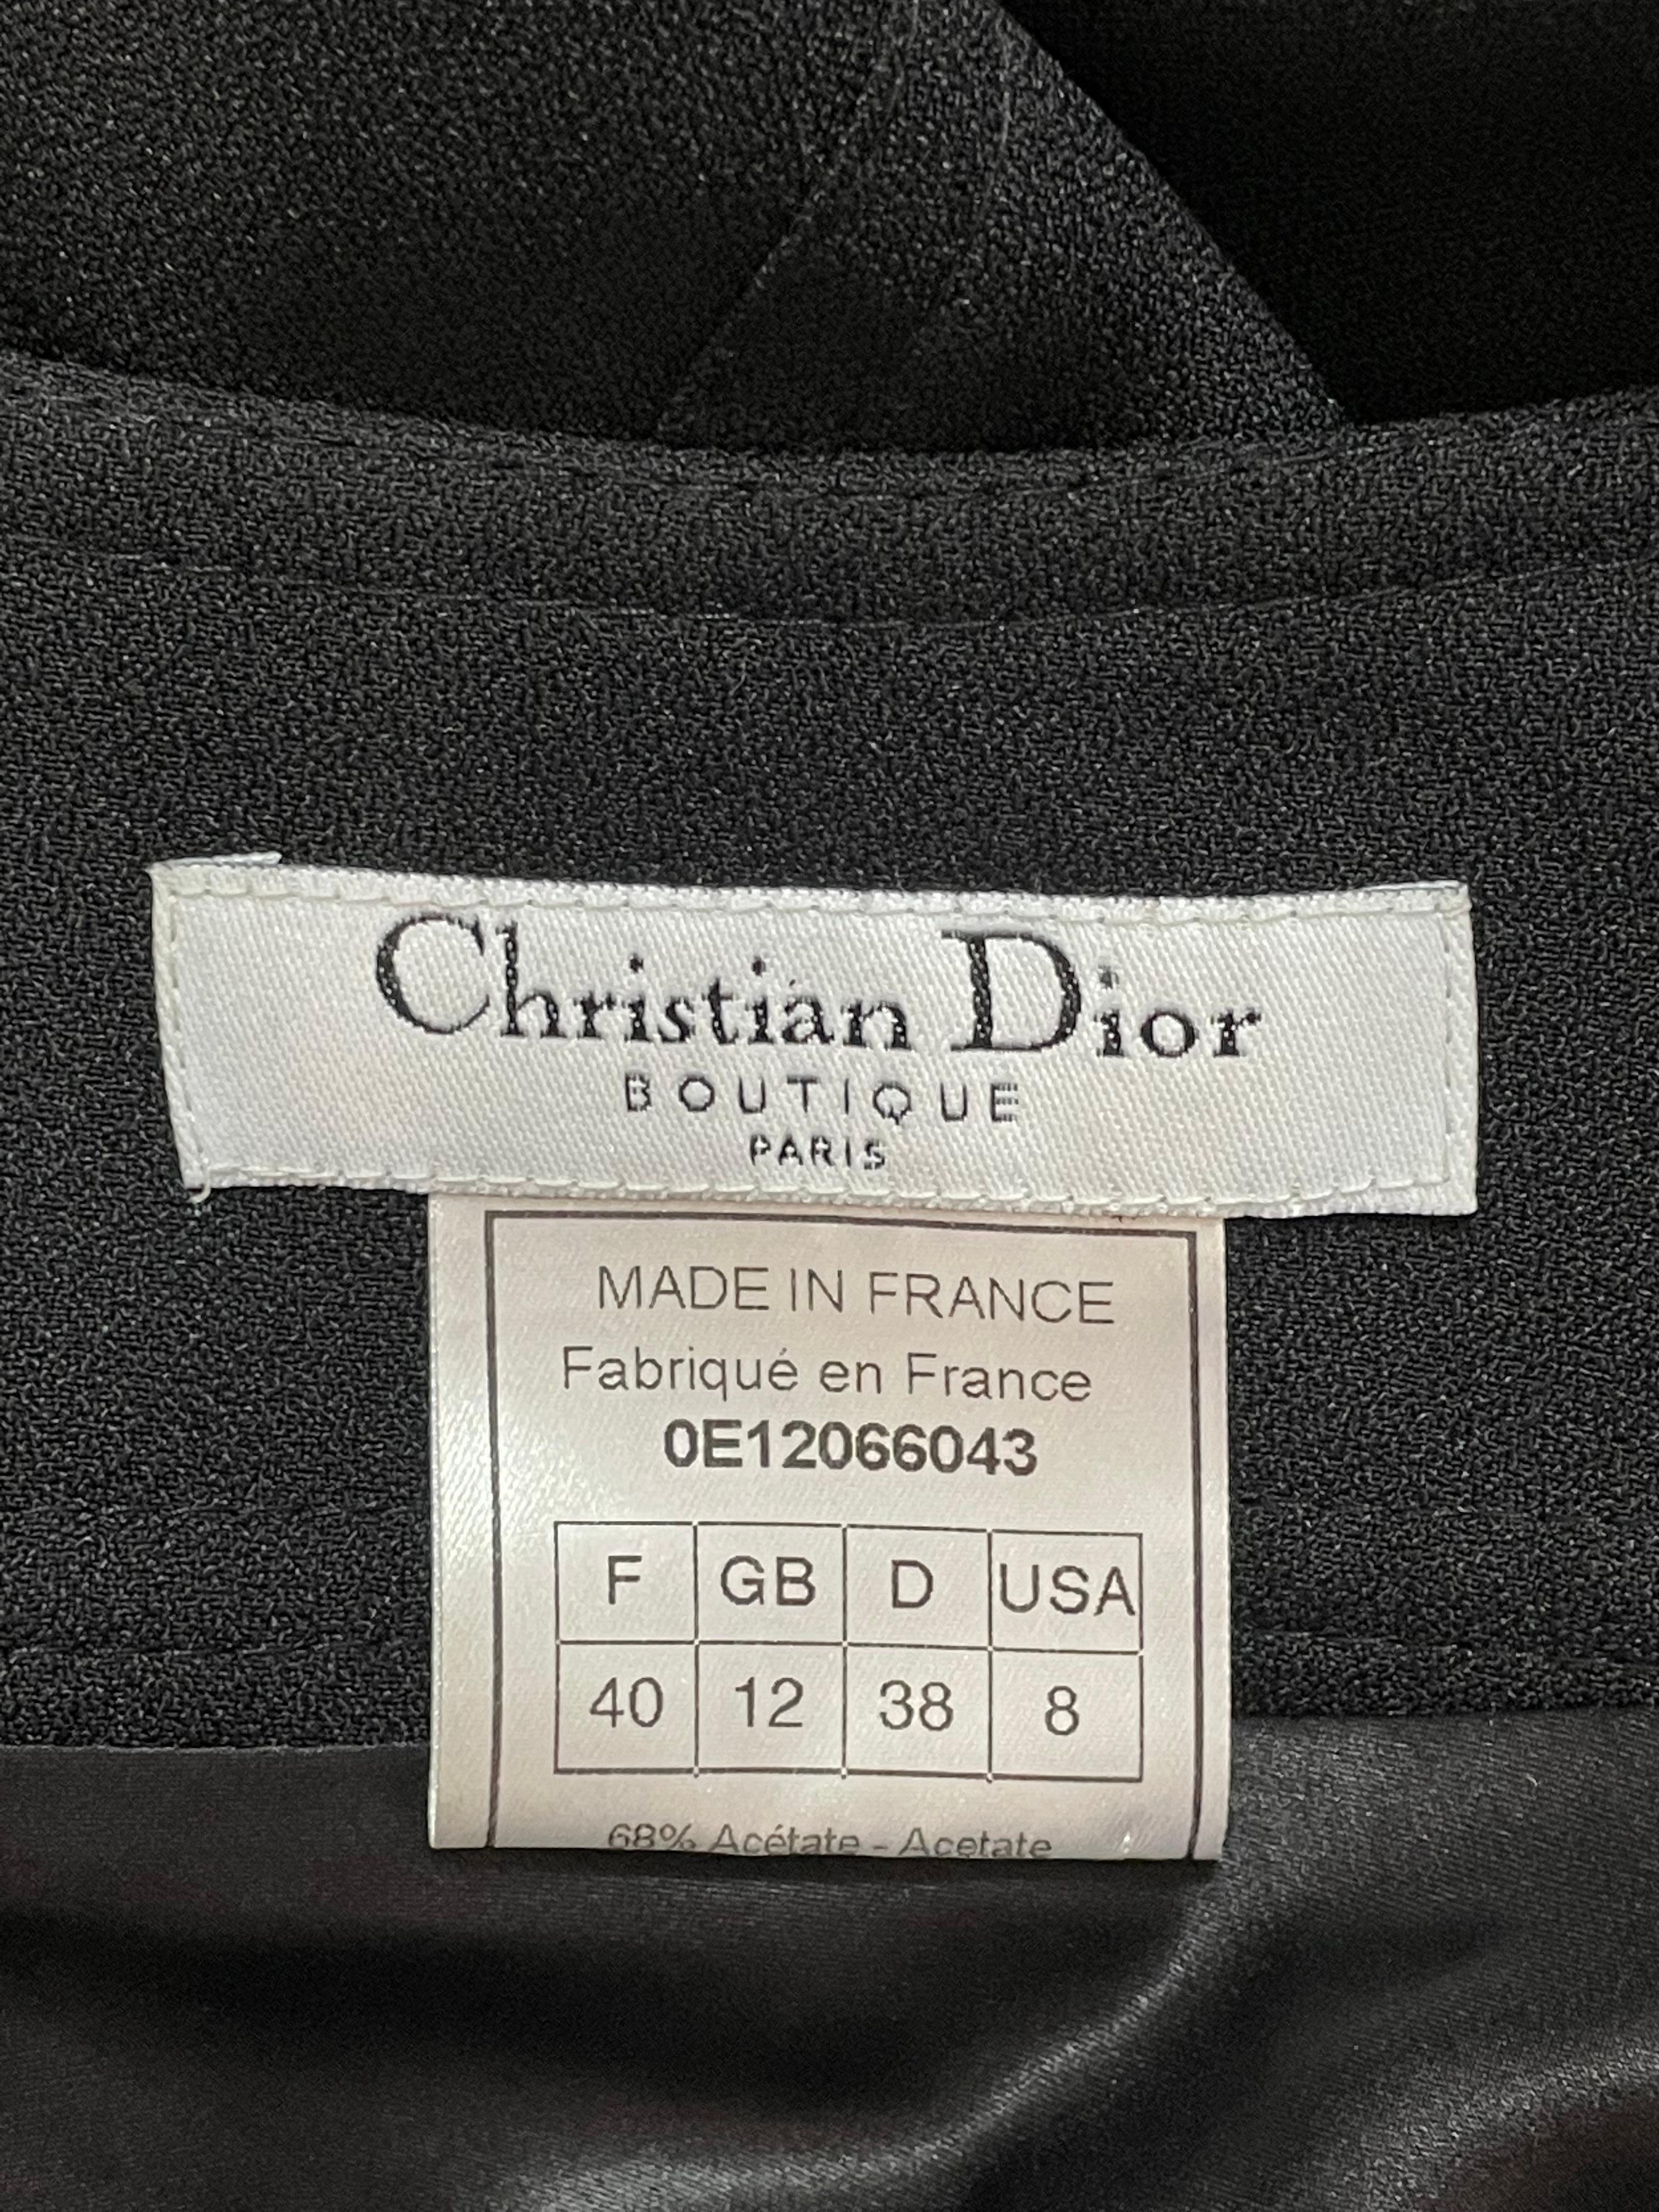 S/S 2000 Christian Dior by John Galliano Black Plunging Gold Logo ...